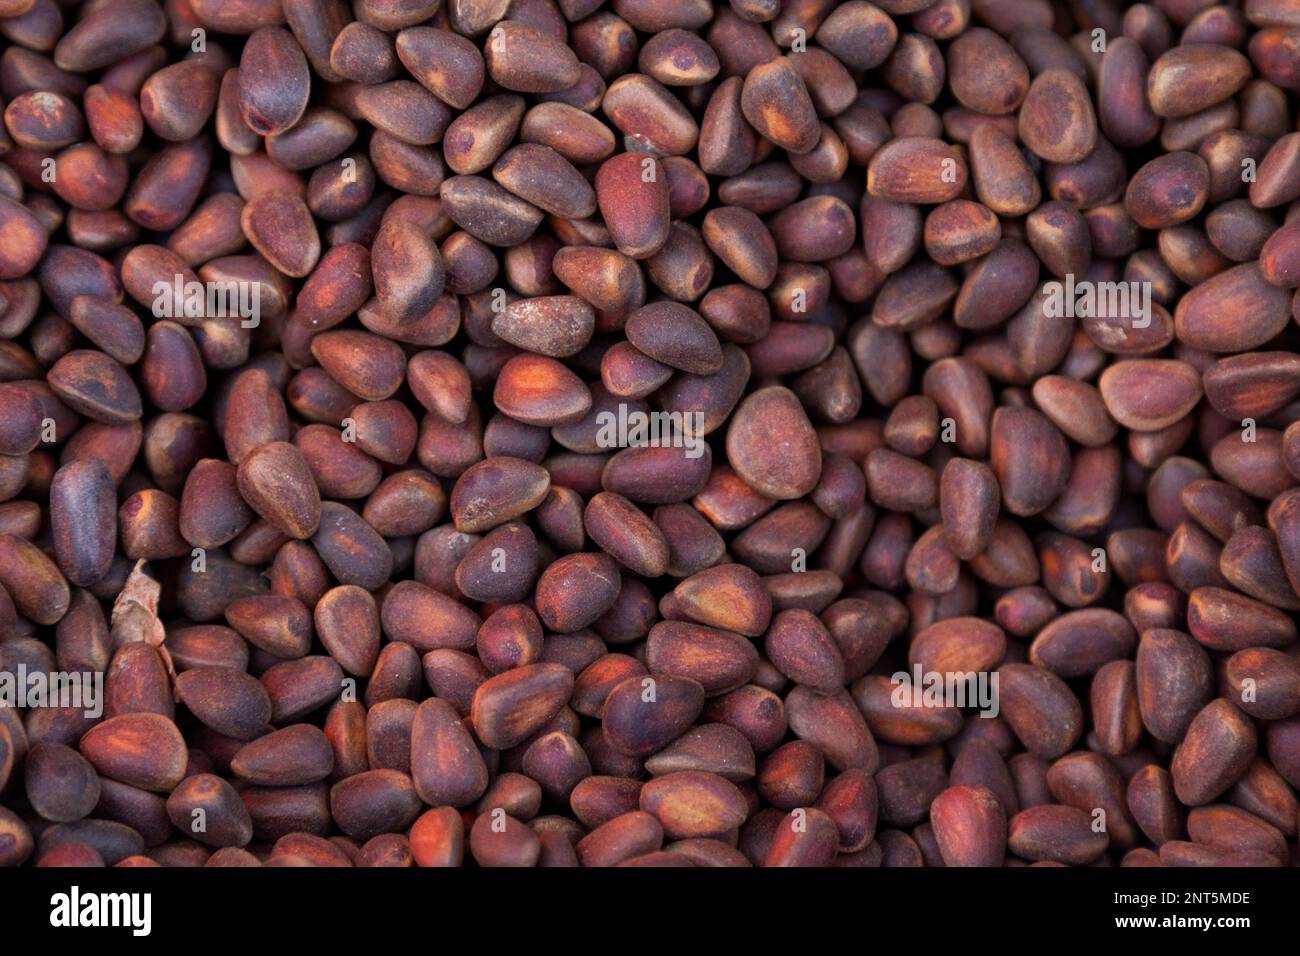 Stack of Siberian pine nuts (Pinus sibirica) on a stall market in Listvyanka. They are cultivated in Eastern Siberia auround the Lake Baikal. Stock Photo